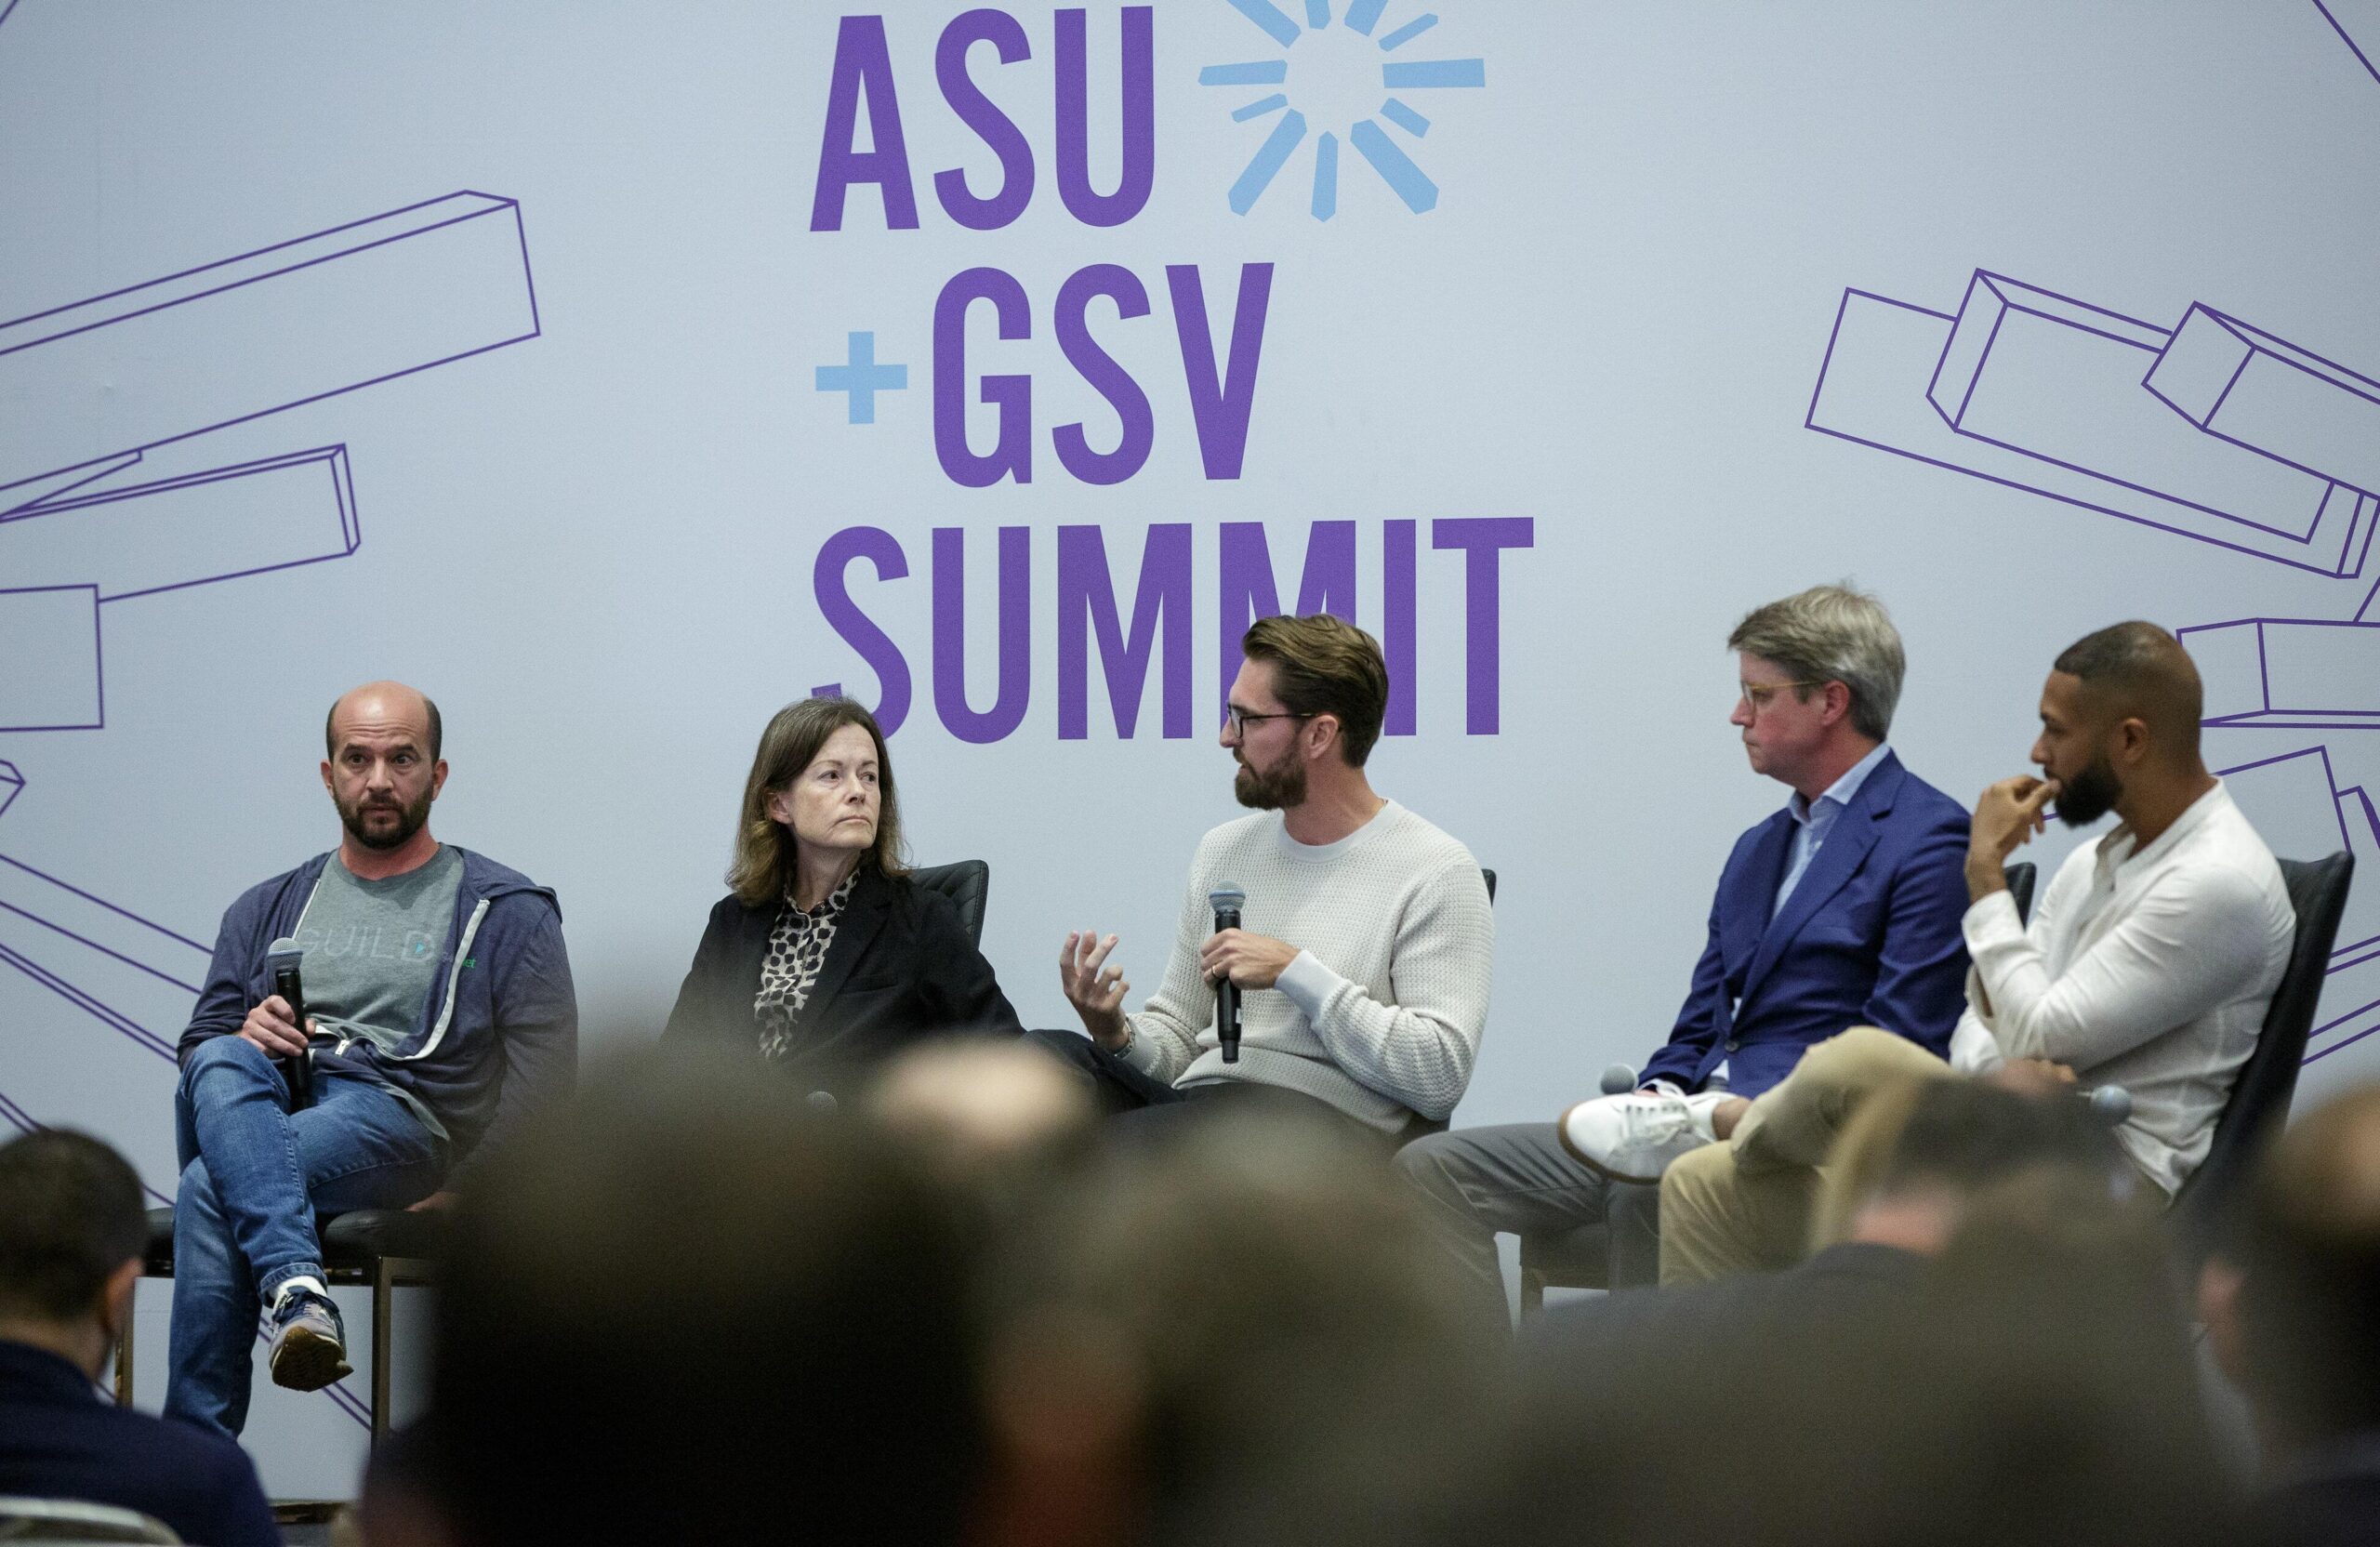 Lee Bradshaw holds a microphone as he speaks on a panel at the ASU+GSV Summit.